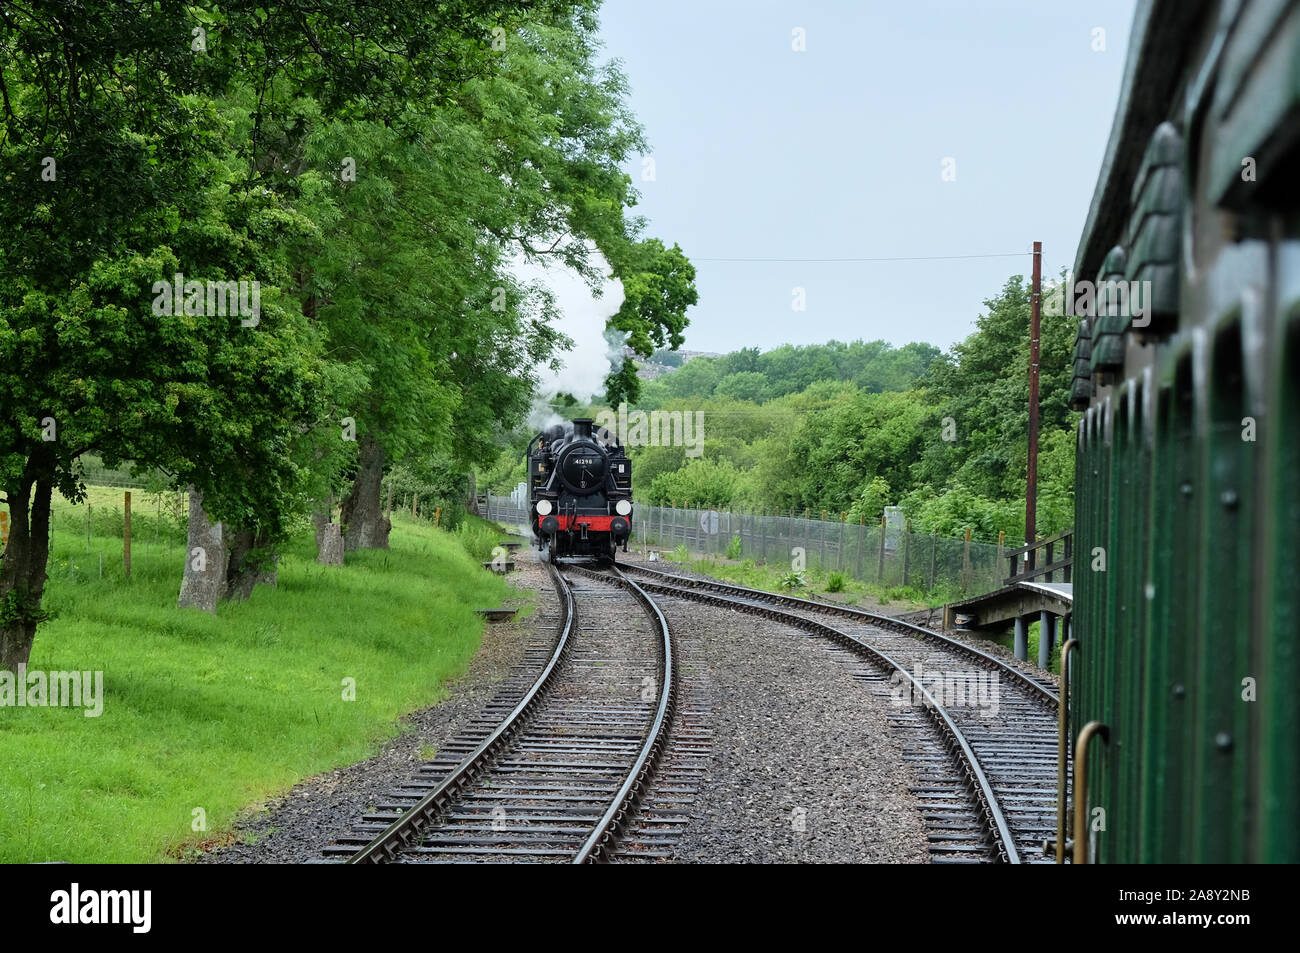 Head on view of the Ivatt class steam locomotive No 41298 returning to pick up carriages in the greenery of the isle of wight Stock Photo